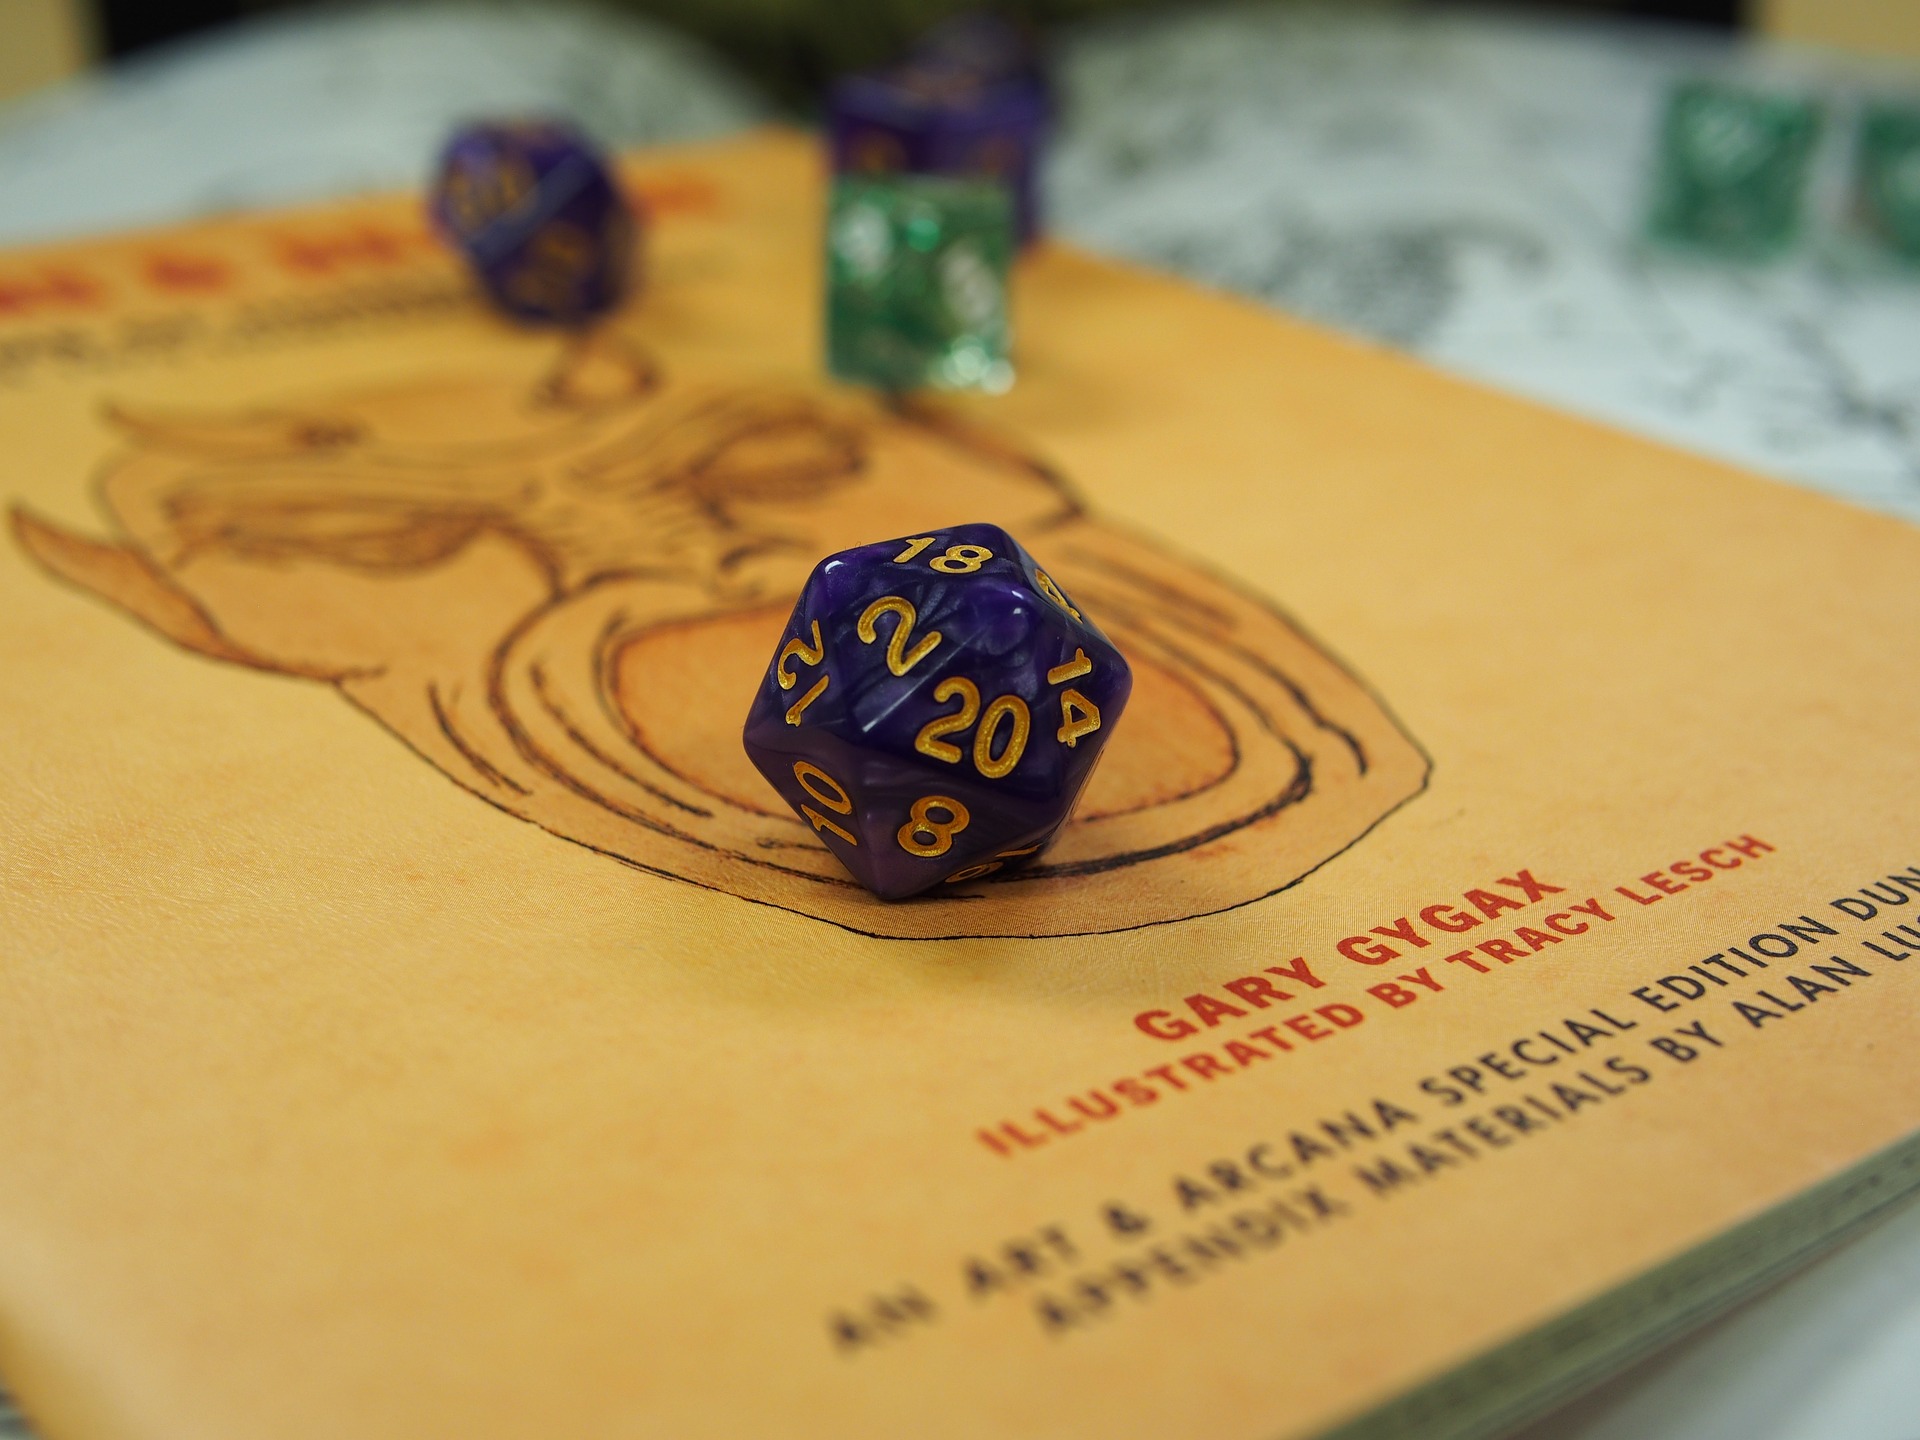 Close-up of a Dungeons & Dragons book featuring artwork and the name Gary Gygax. A purple twenty-sided die (d20) with gold numbers, showing a 20, rests on top of the book.